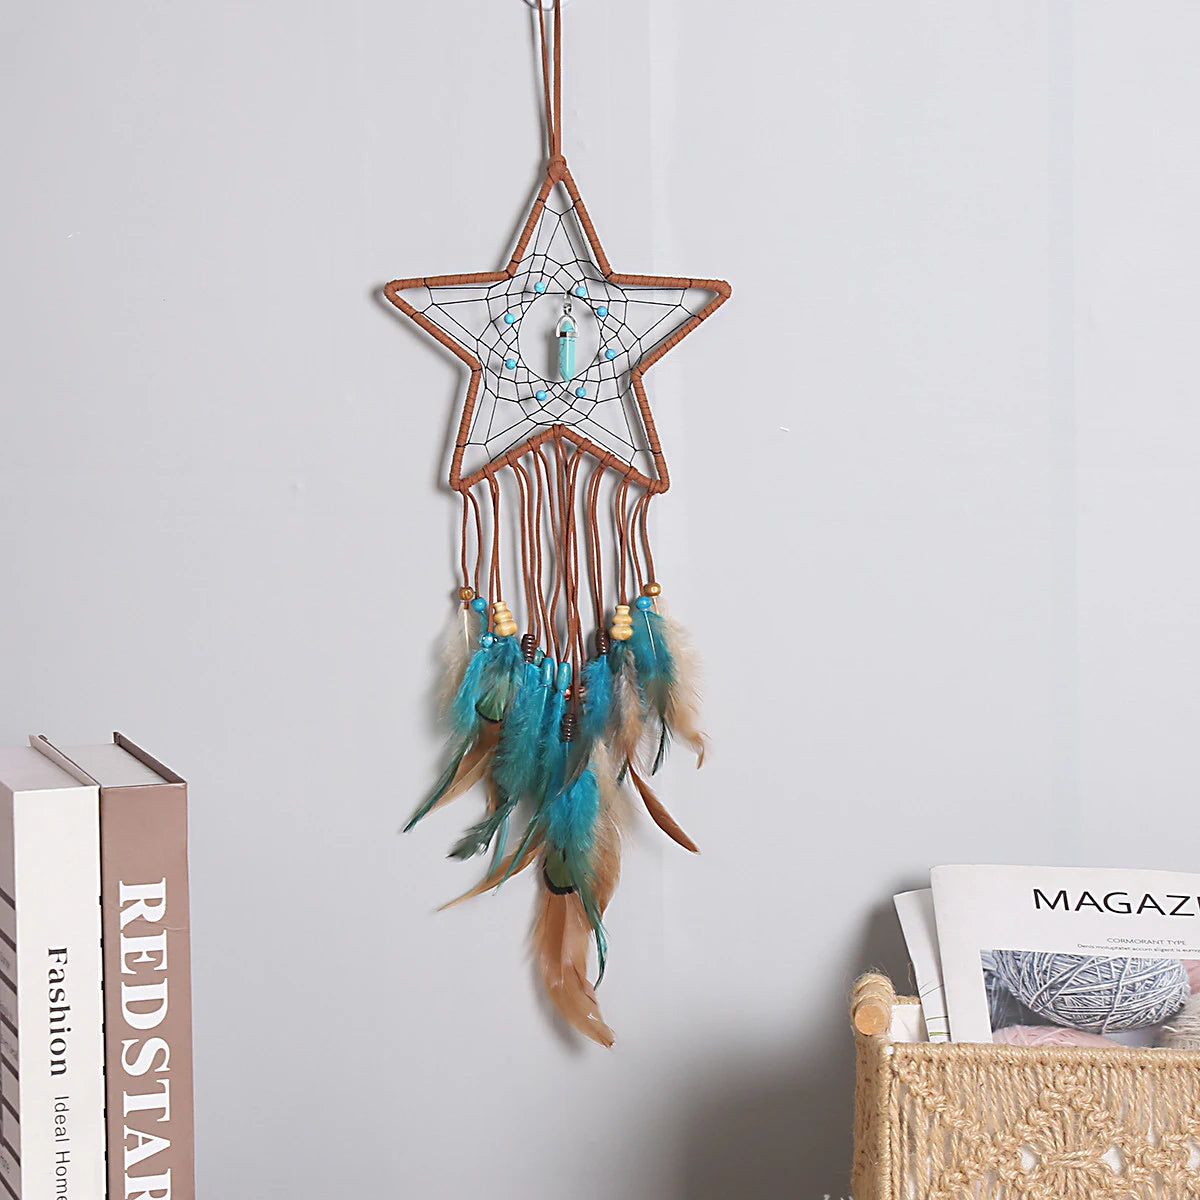 Aesthetic Dream Catcher Room Wall Decor Art Handmade Feather Life Tree Luxury Decorative Items For Home Decorations Accessories-Dollar Bargains Online Shopping Australia